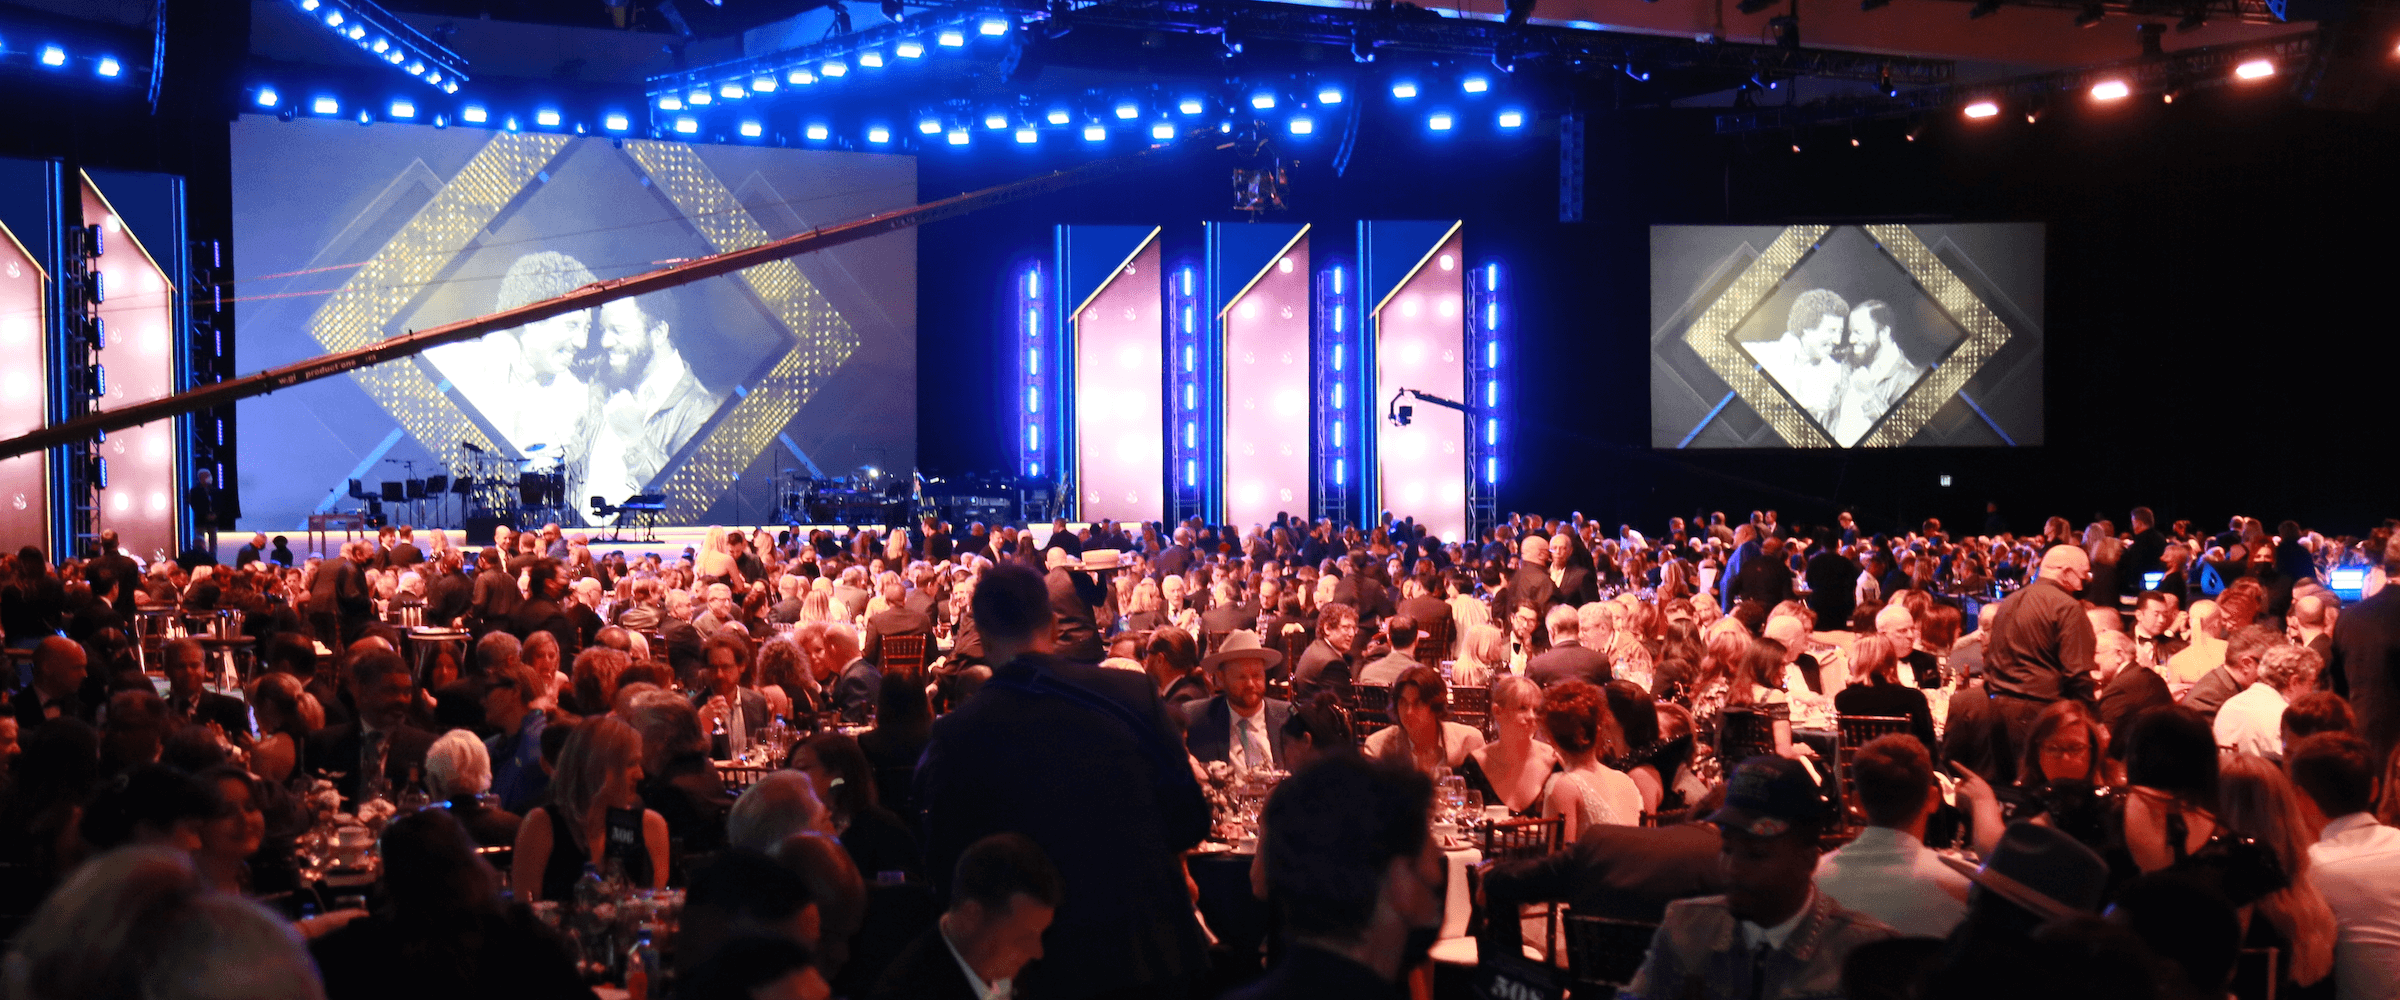 musicares gala in the L.A. convention center - desktop version